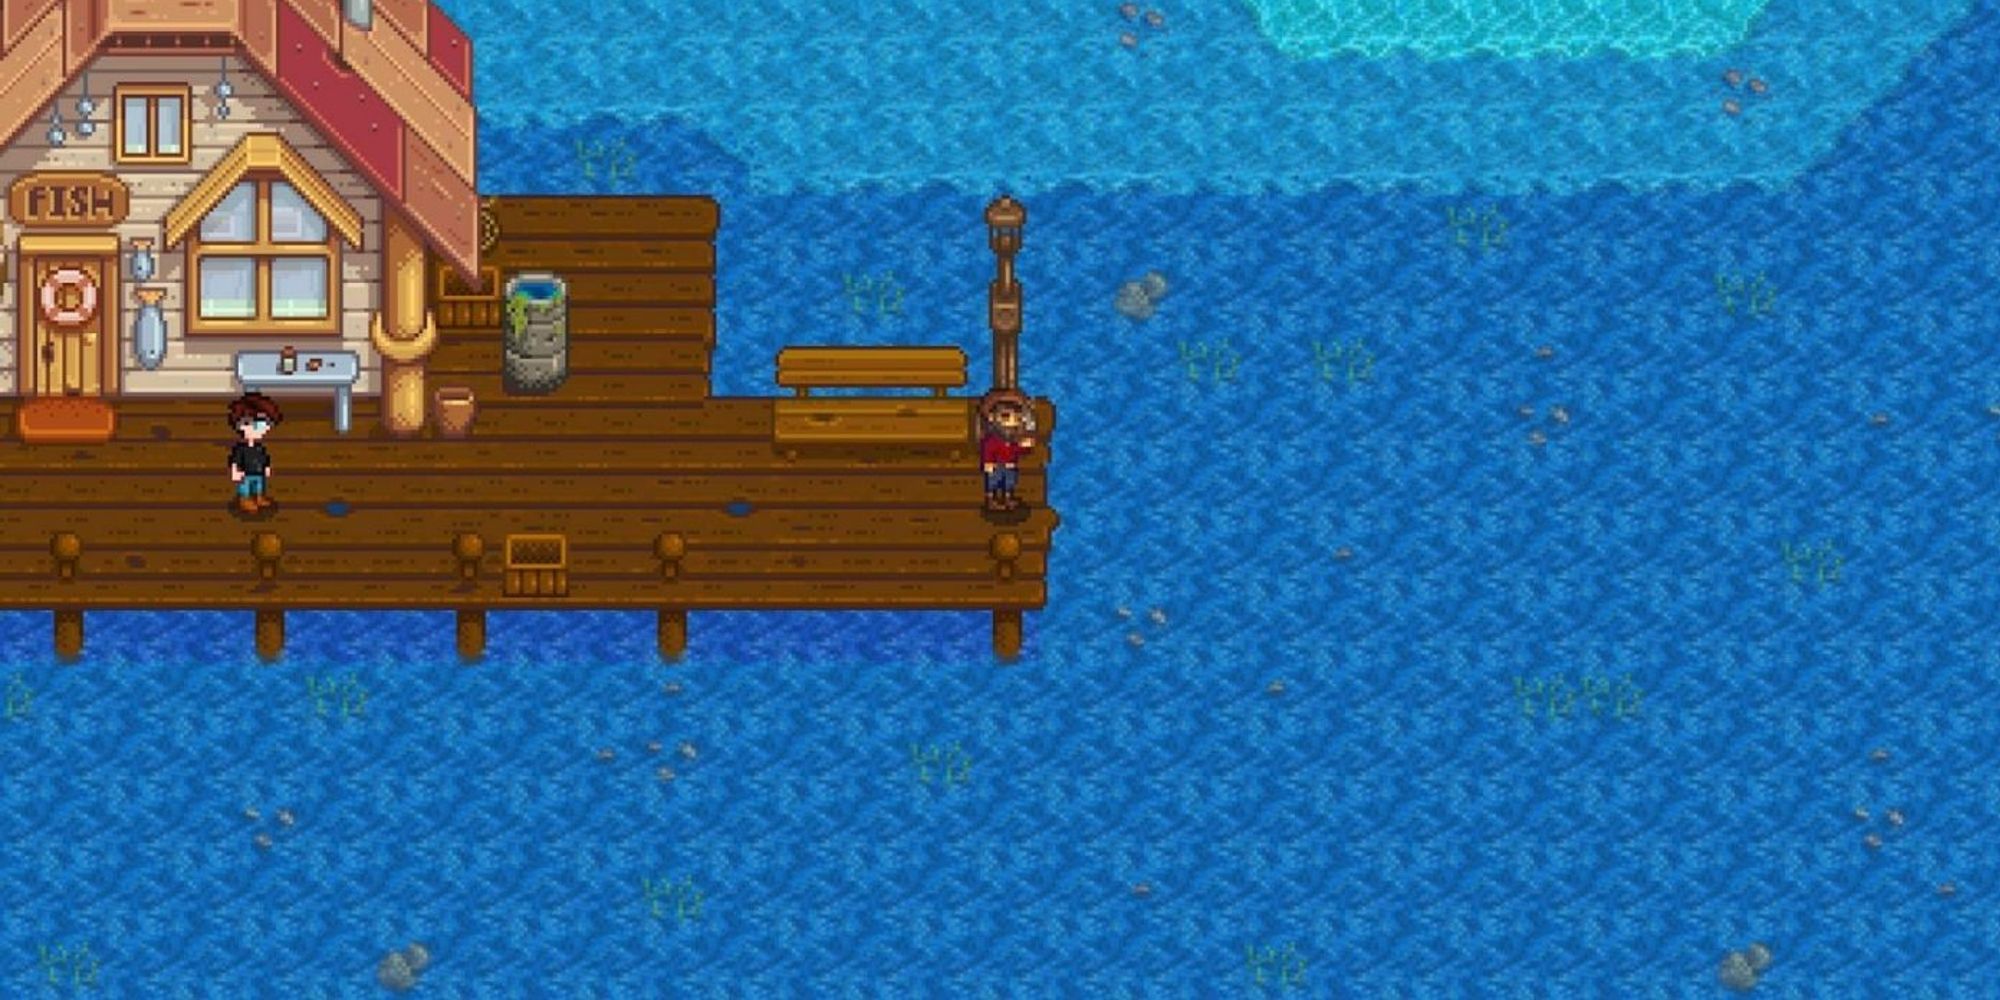 Stardew Valley Ocean - Willy standing on the ocean dock, with player character approaching from behind.